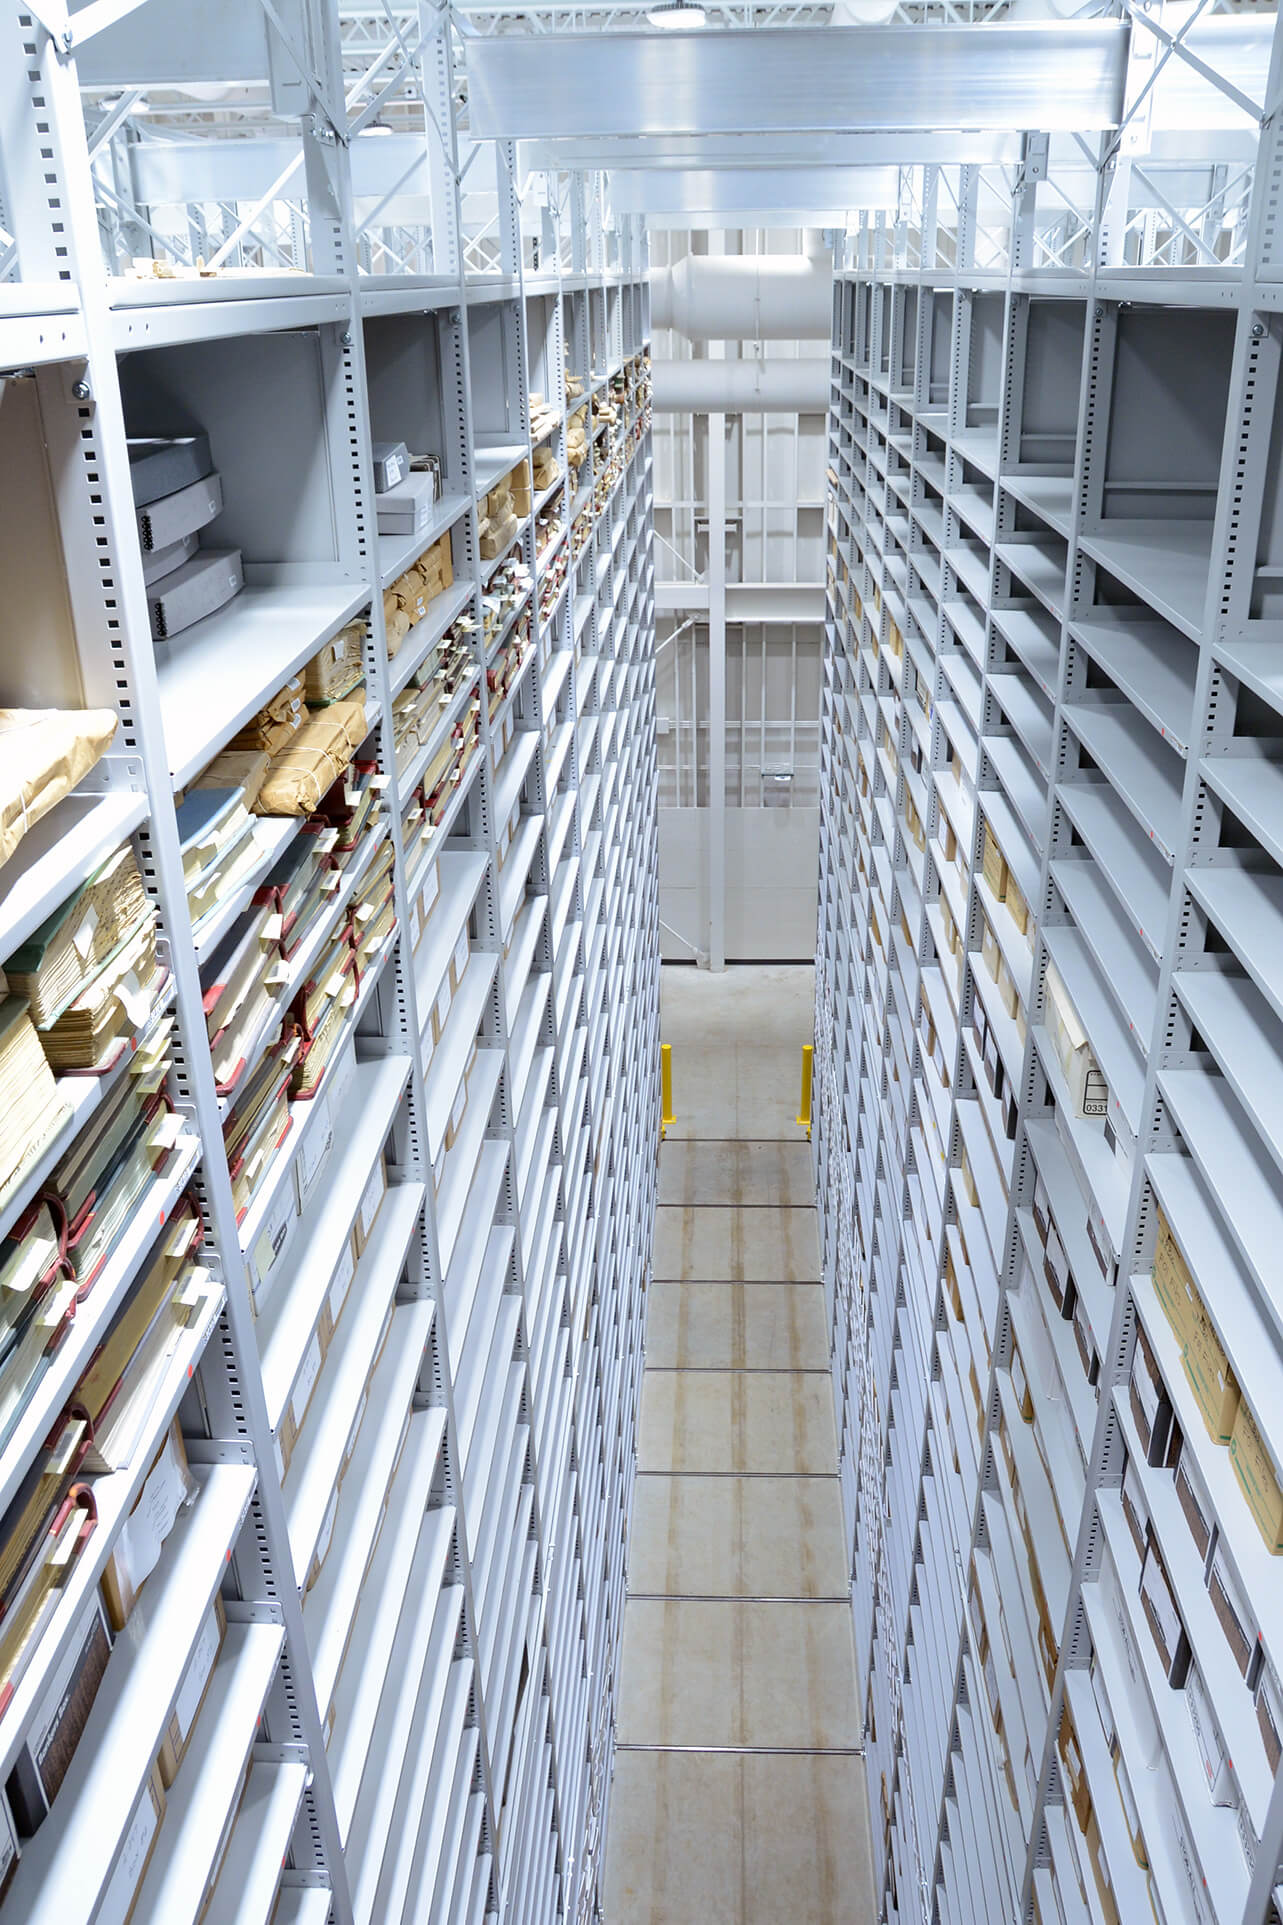 Archival Library Shelving on 34 foot tall compact mobile storage system